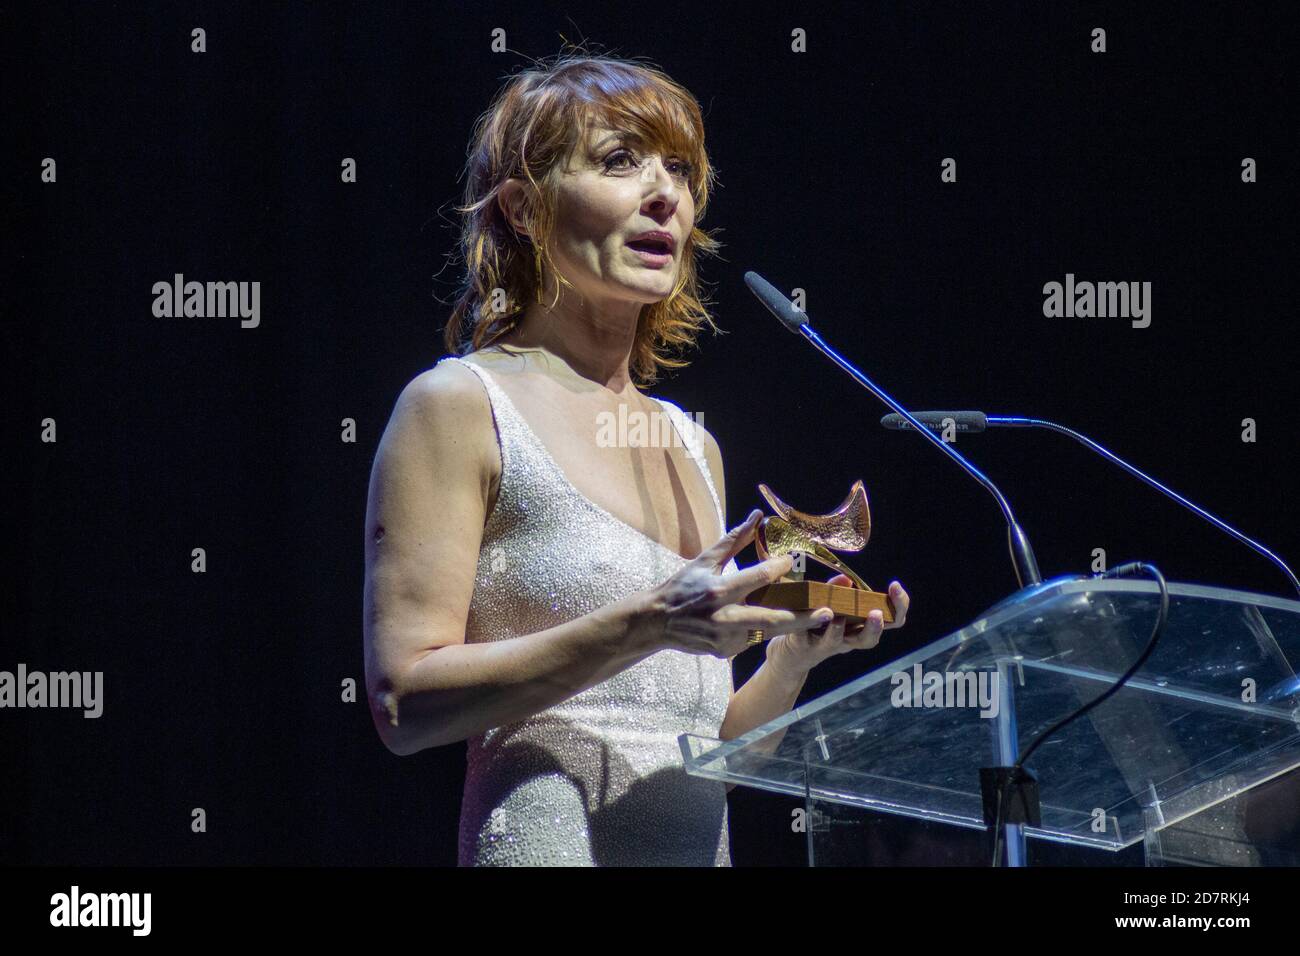 Nathalie Poza receives her award from 'Union de Actores' Awards 2020 at Teatro Circo Price in Madrid, Spain.March 09, 2020. (Oscar Gil / Alfa Images) Stock Photo